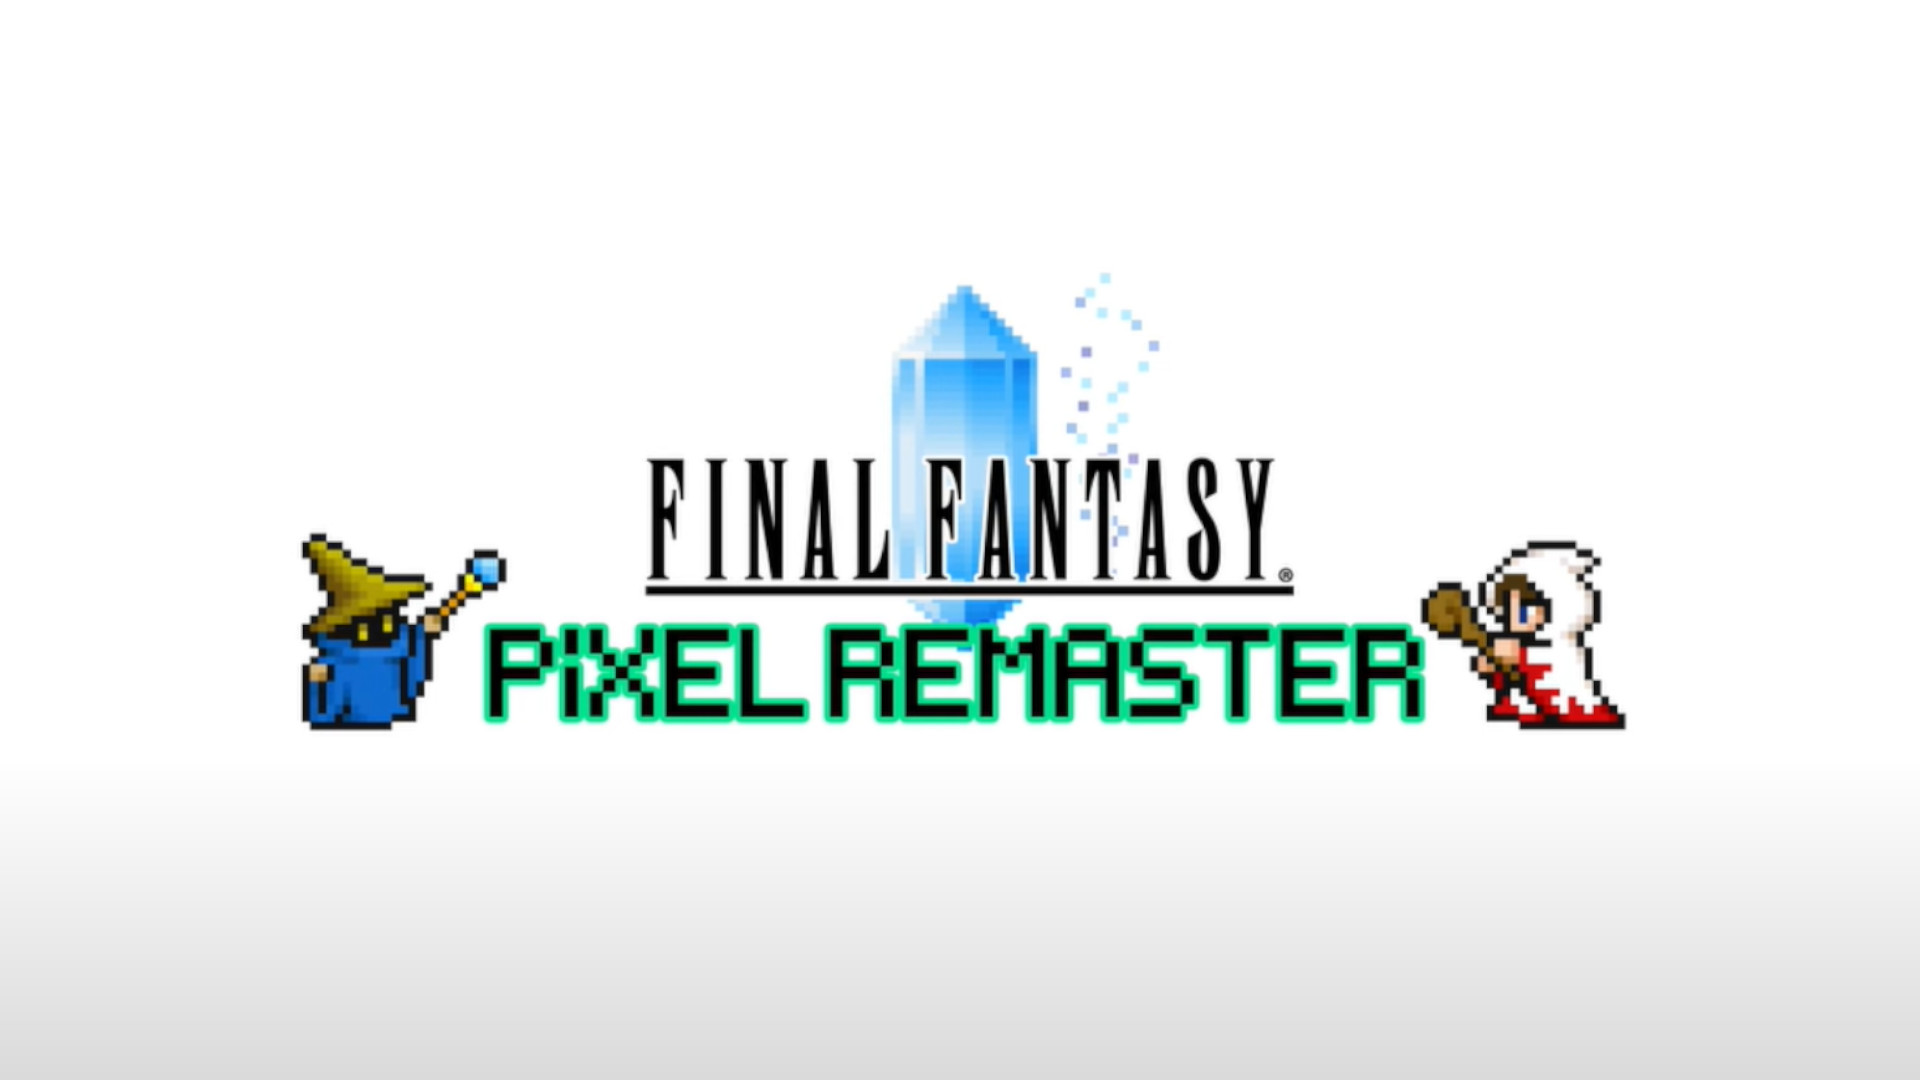 Final Fantasy Pixel Remaster brings the first six games to Steam, separately